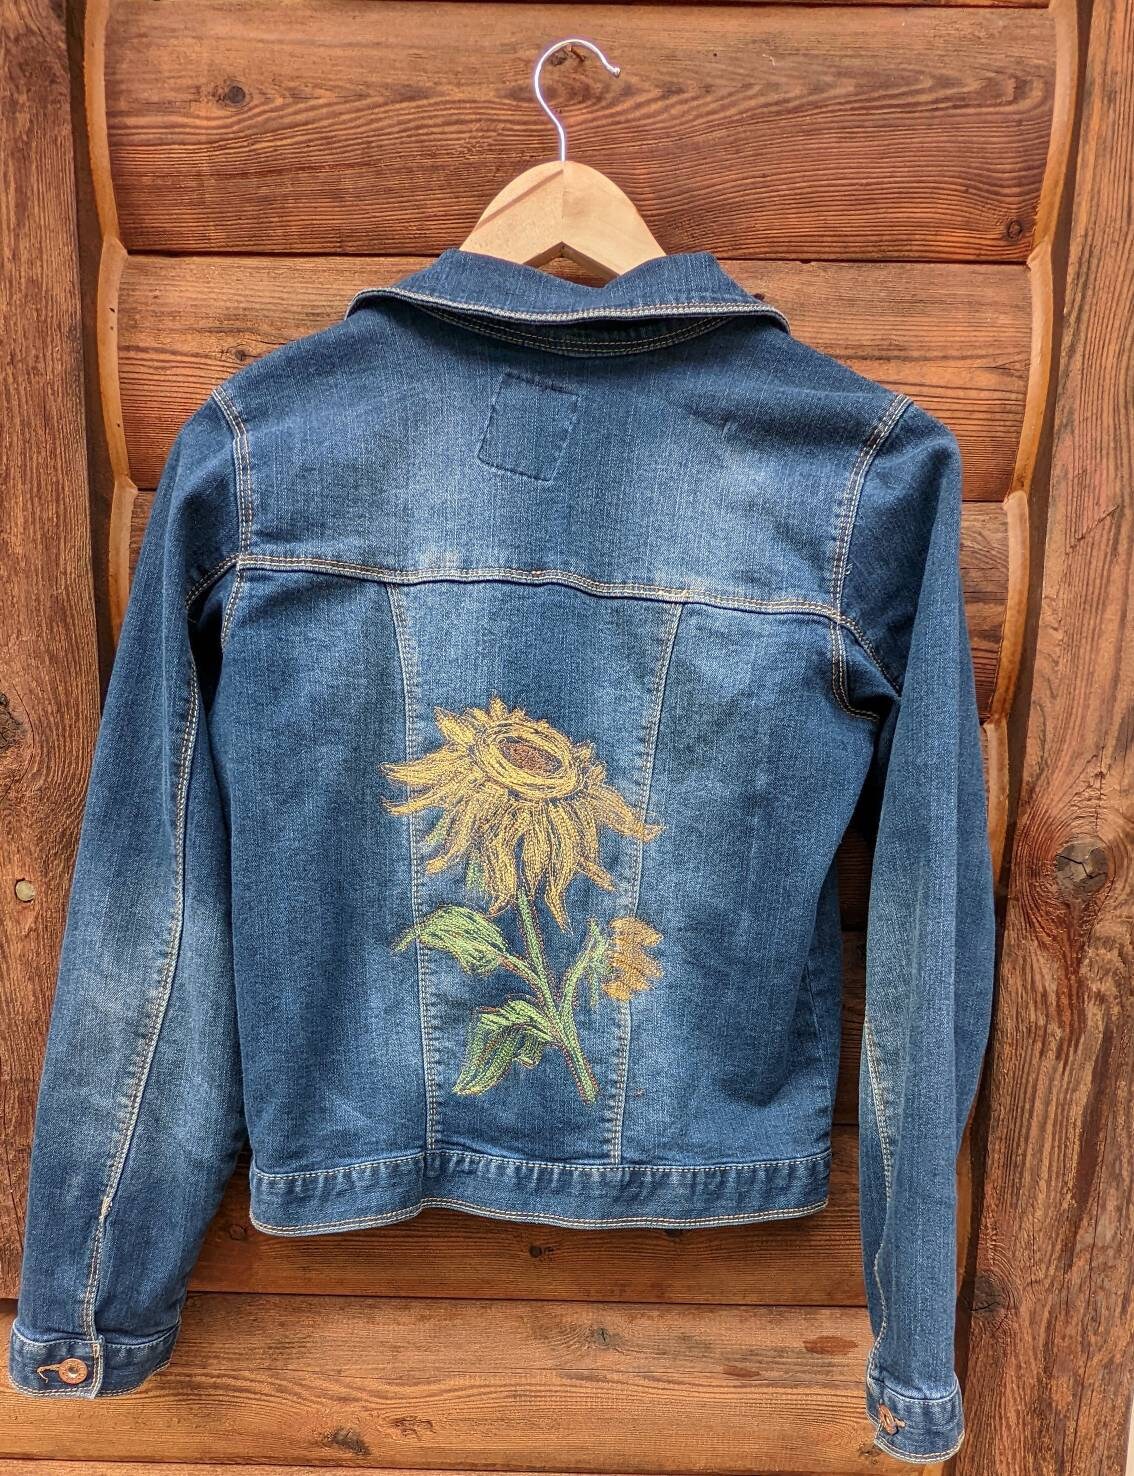 Embroidered Sunflower on a Jean Jacket - Etsy